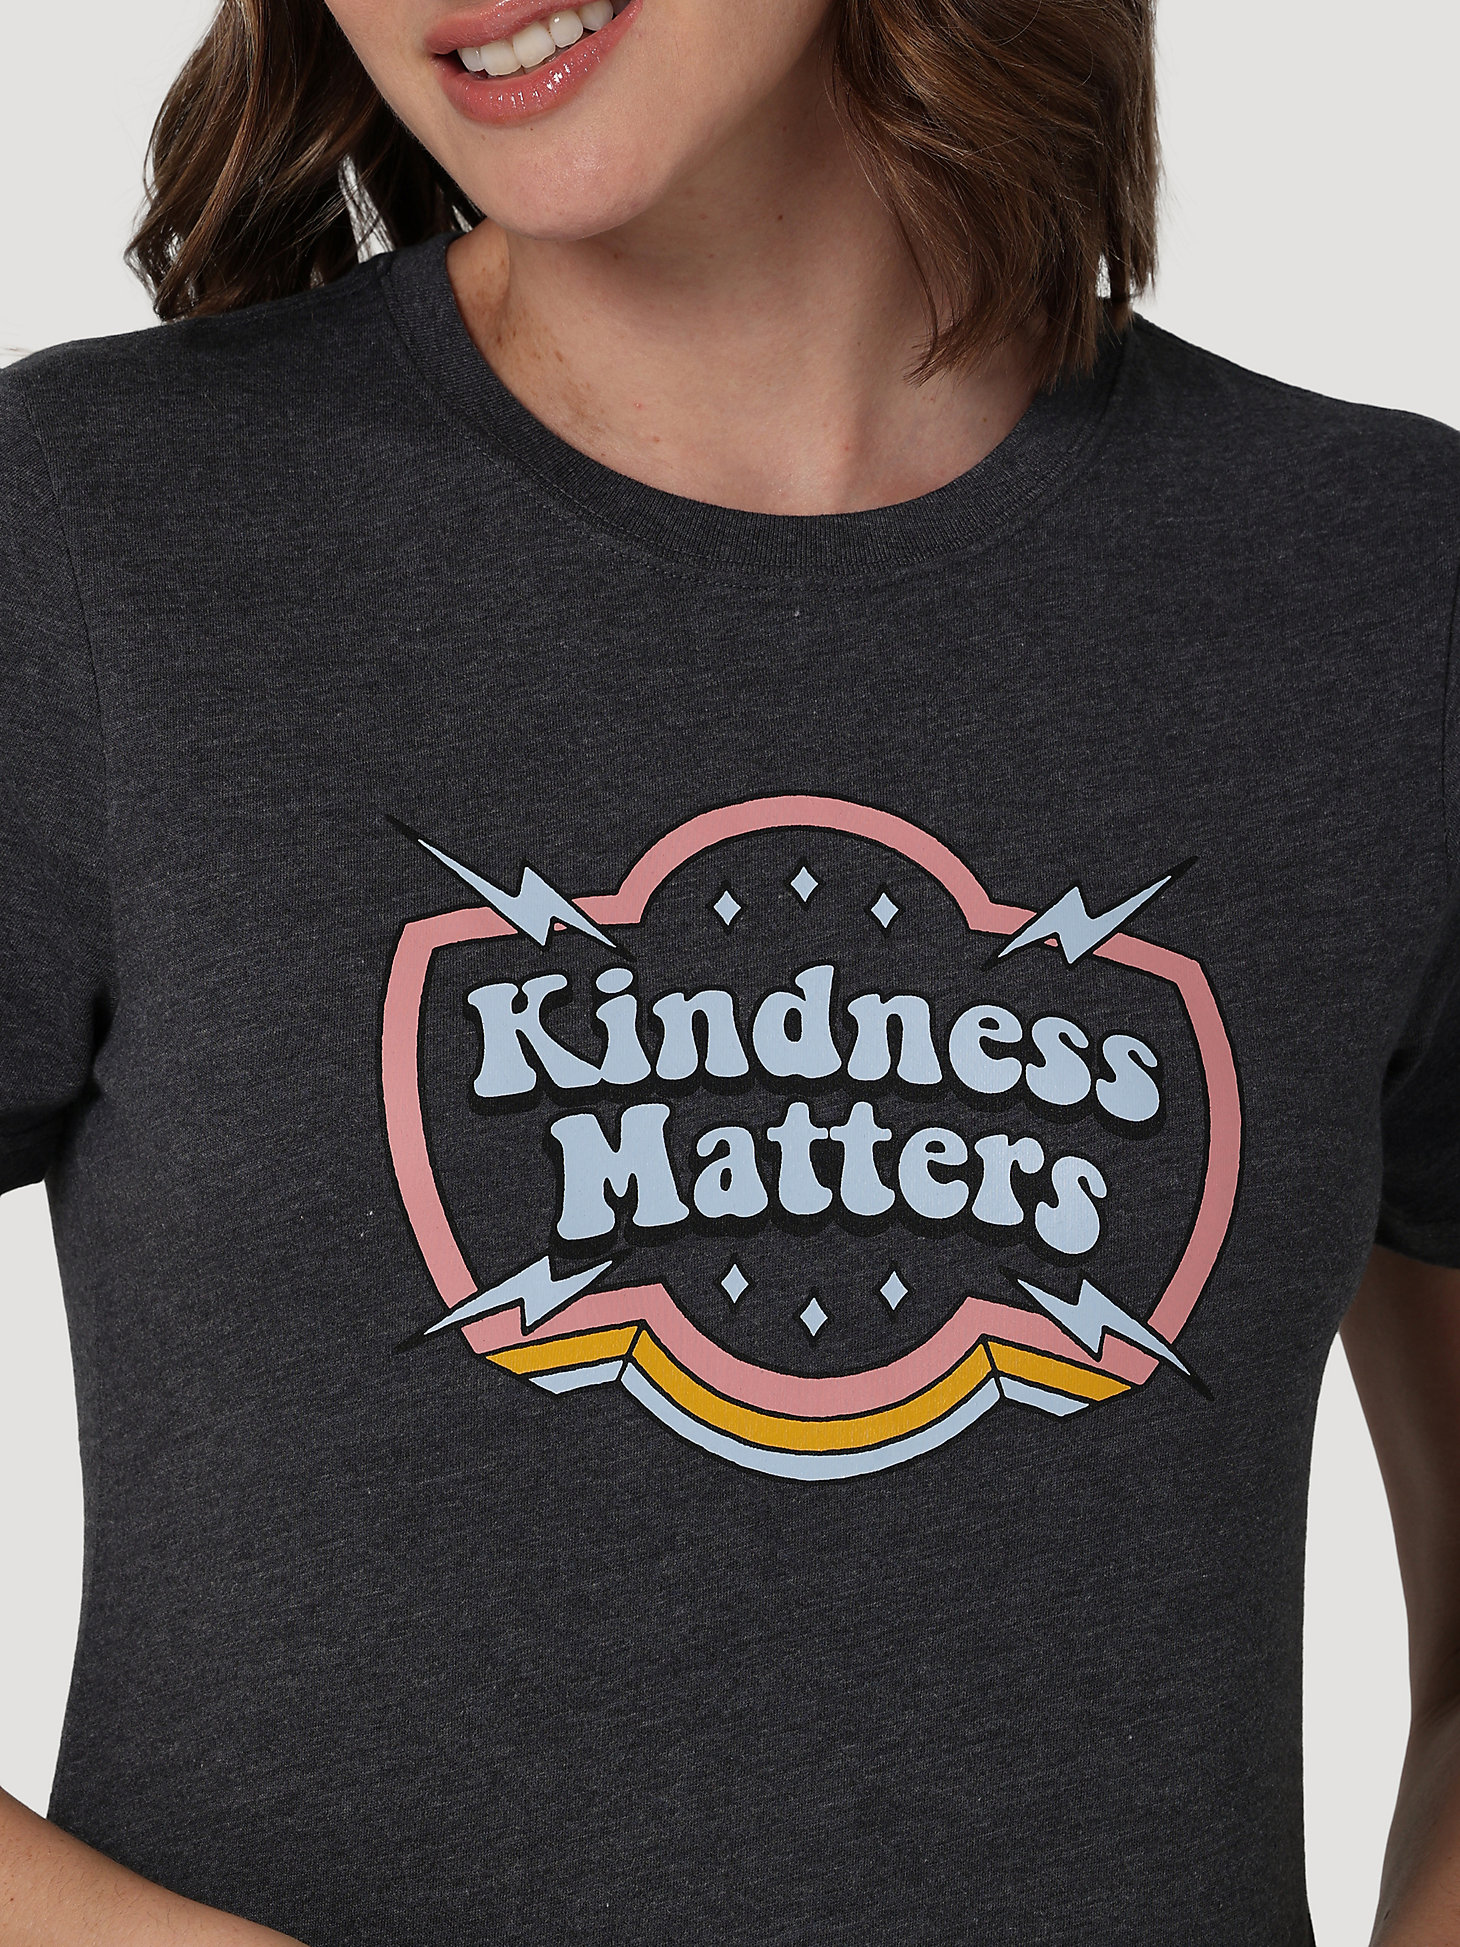 Women's Kindness Matters Graphic Tee in Caviar alternative view 2